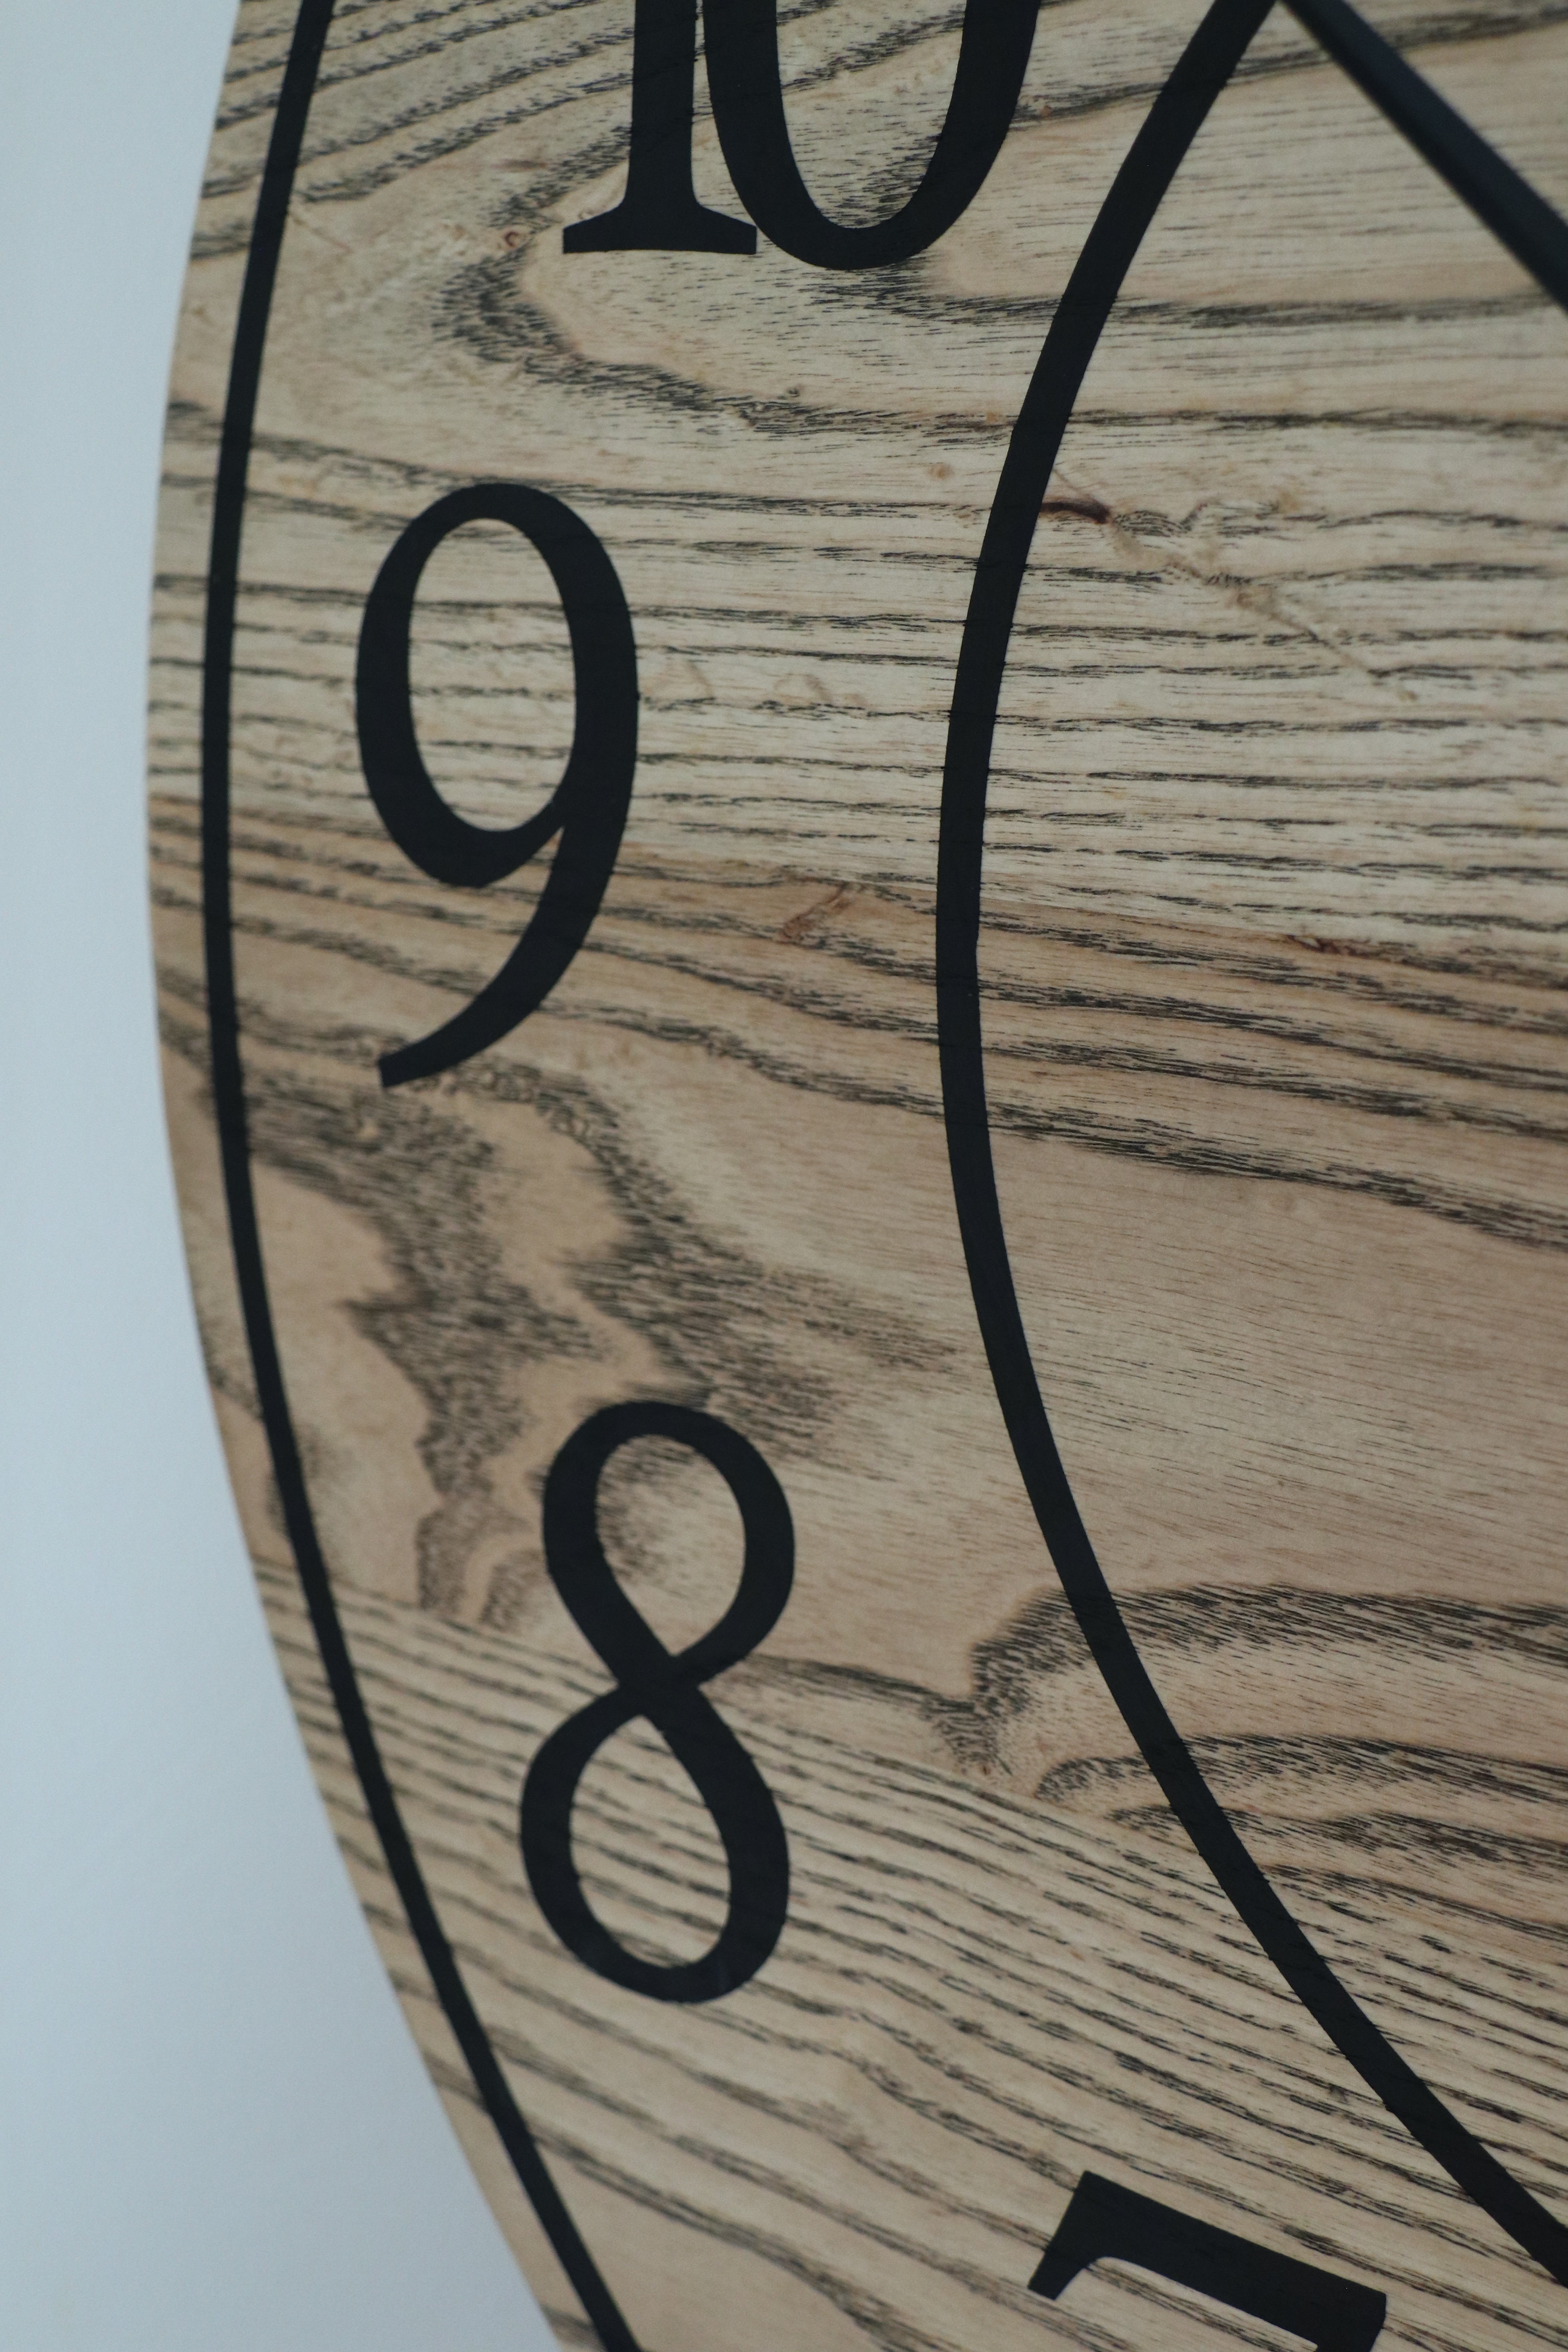 26&quot; Solid Ash Wood Wall Clock with Walnut Stain (in stock)